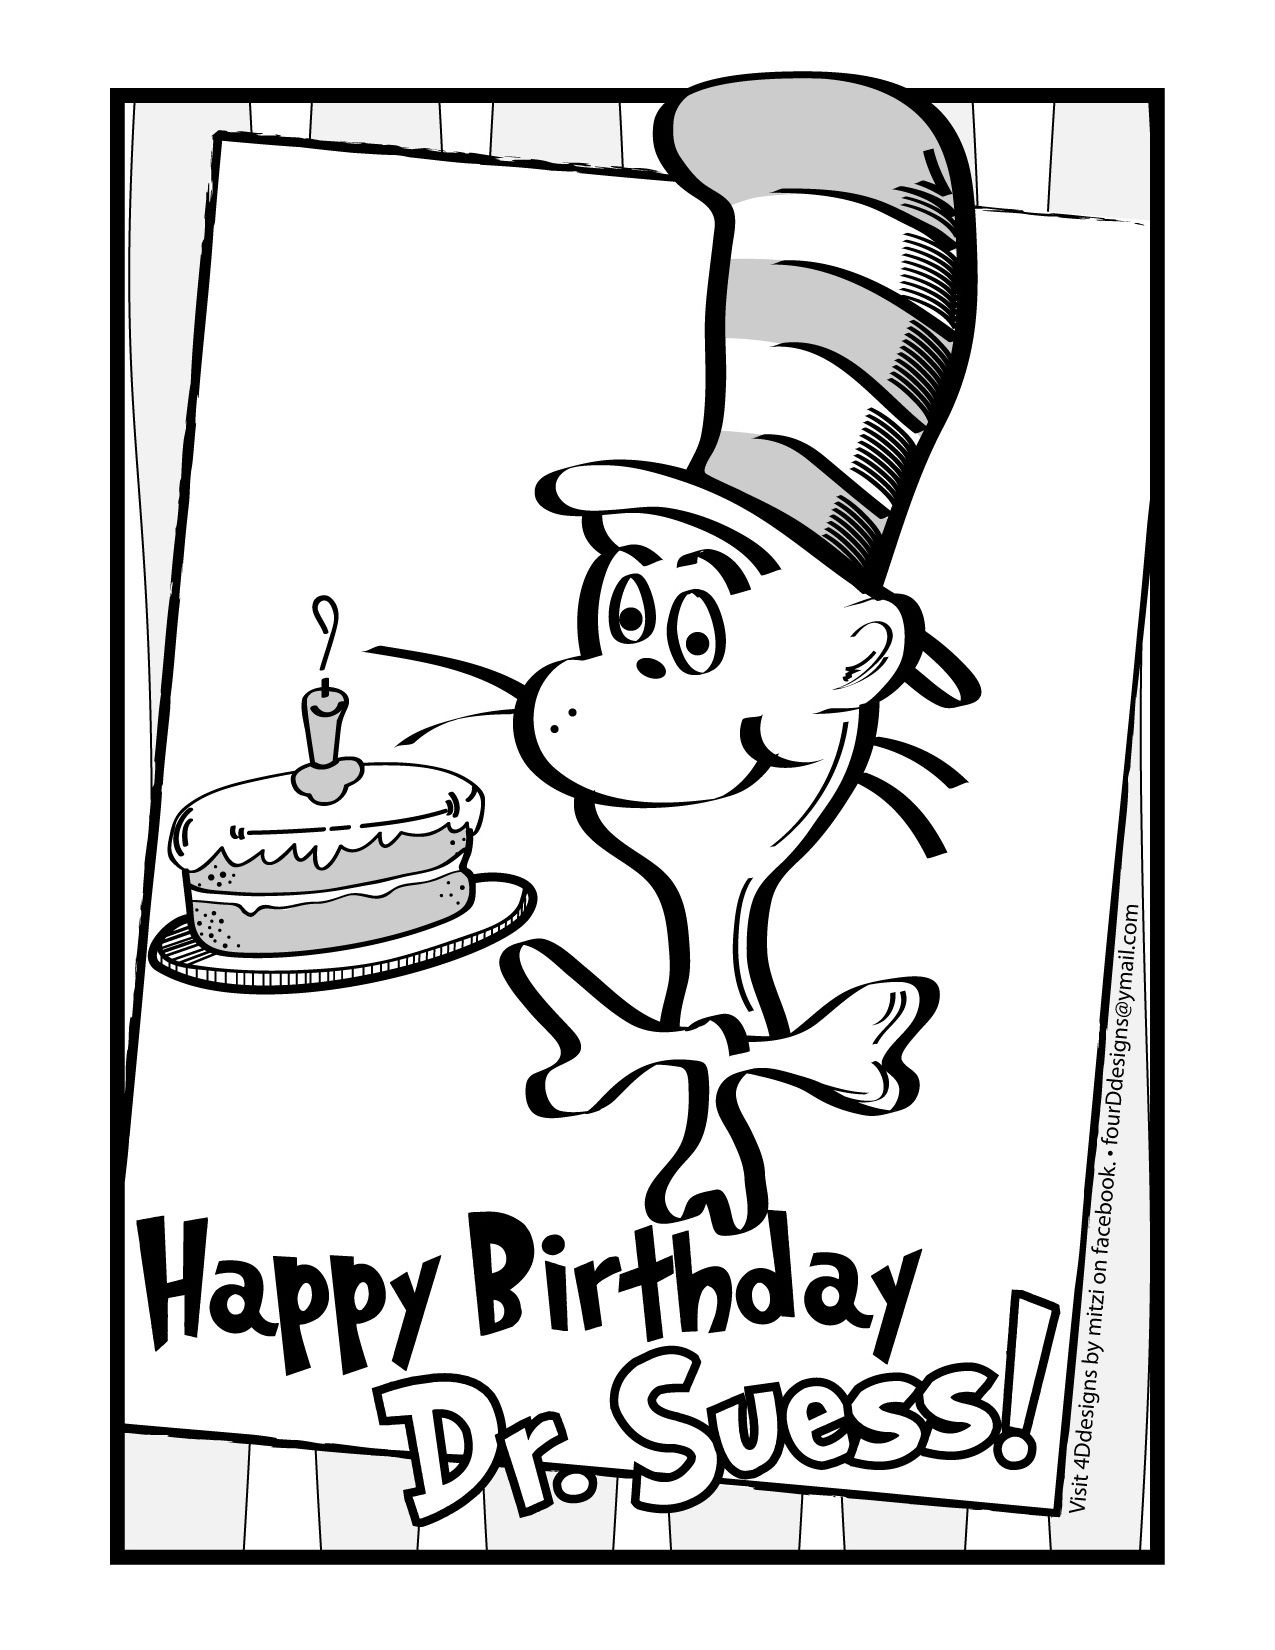 happy birthday dr. suess! coloring page • free download | dr seuss free printable dr seuss coloring pages